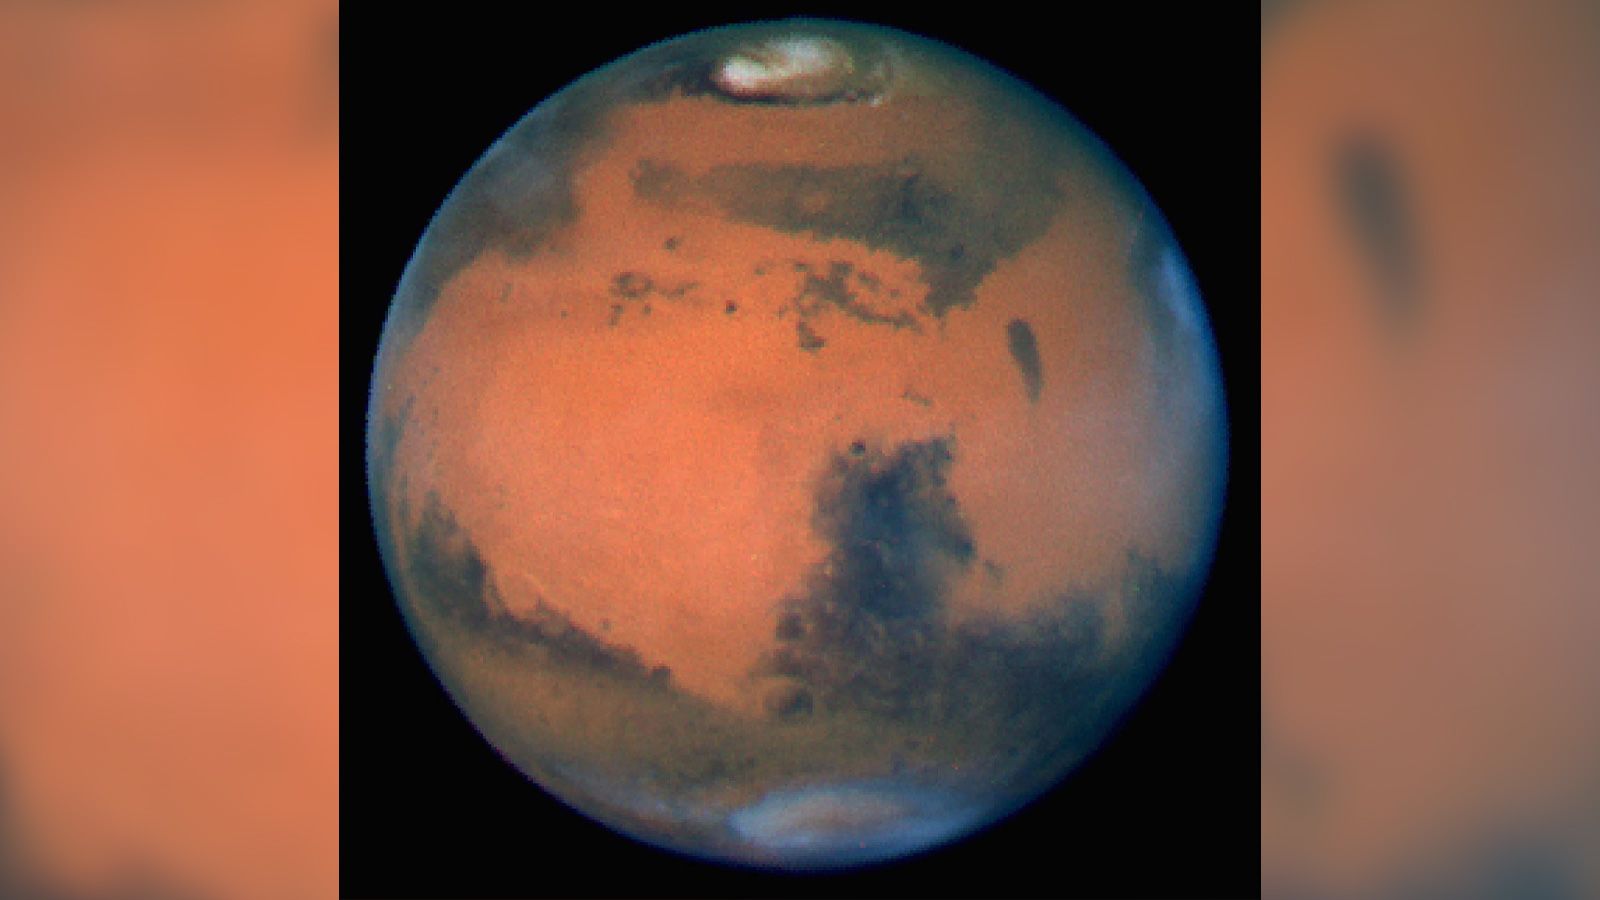 The European Space Agency is set to stream on YouTube the first live images directly from Mars, acc...